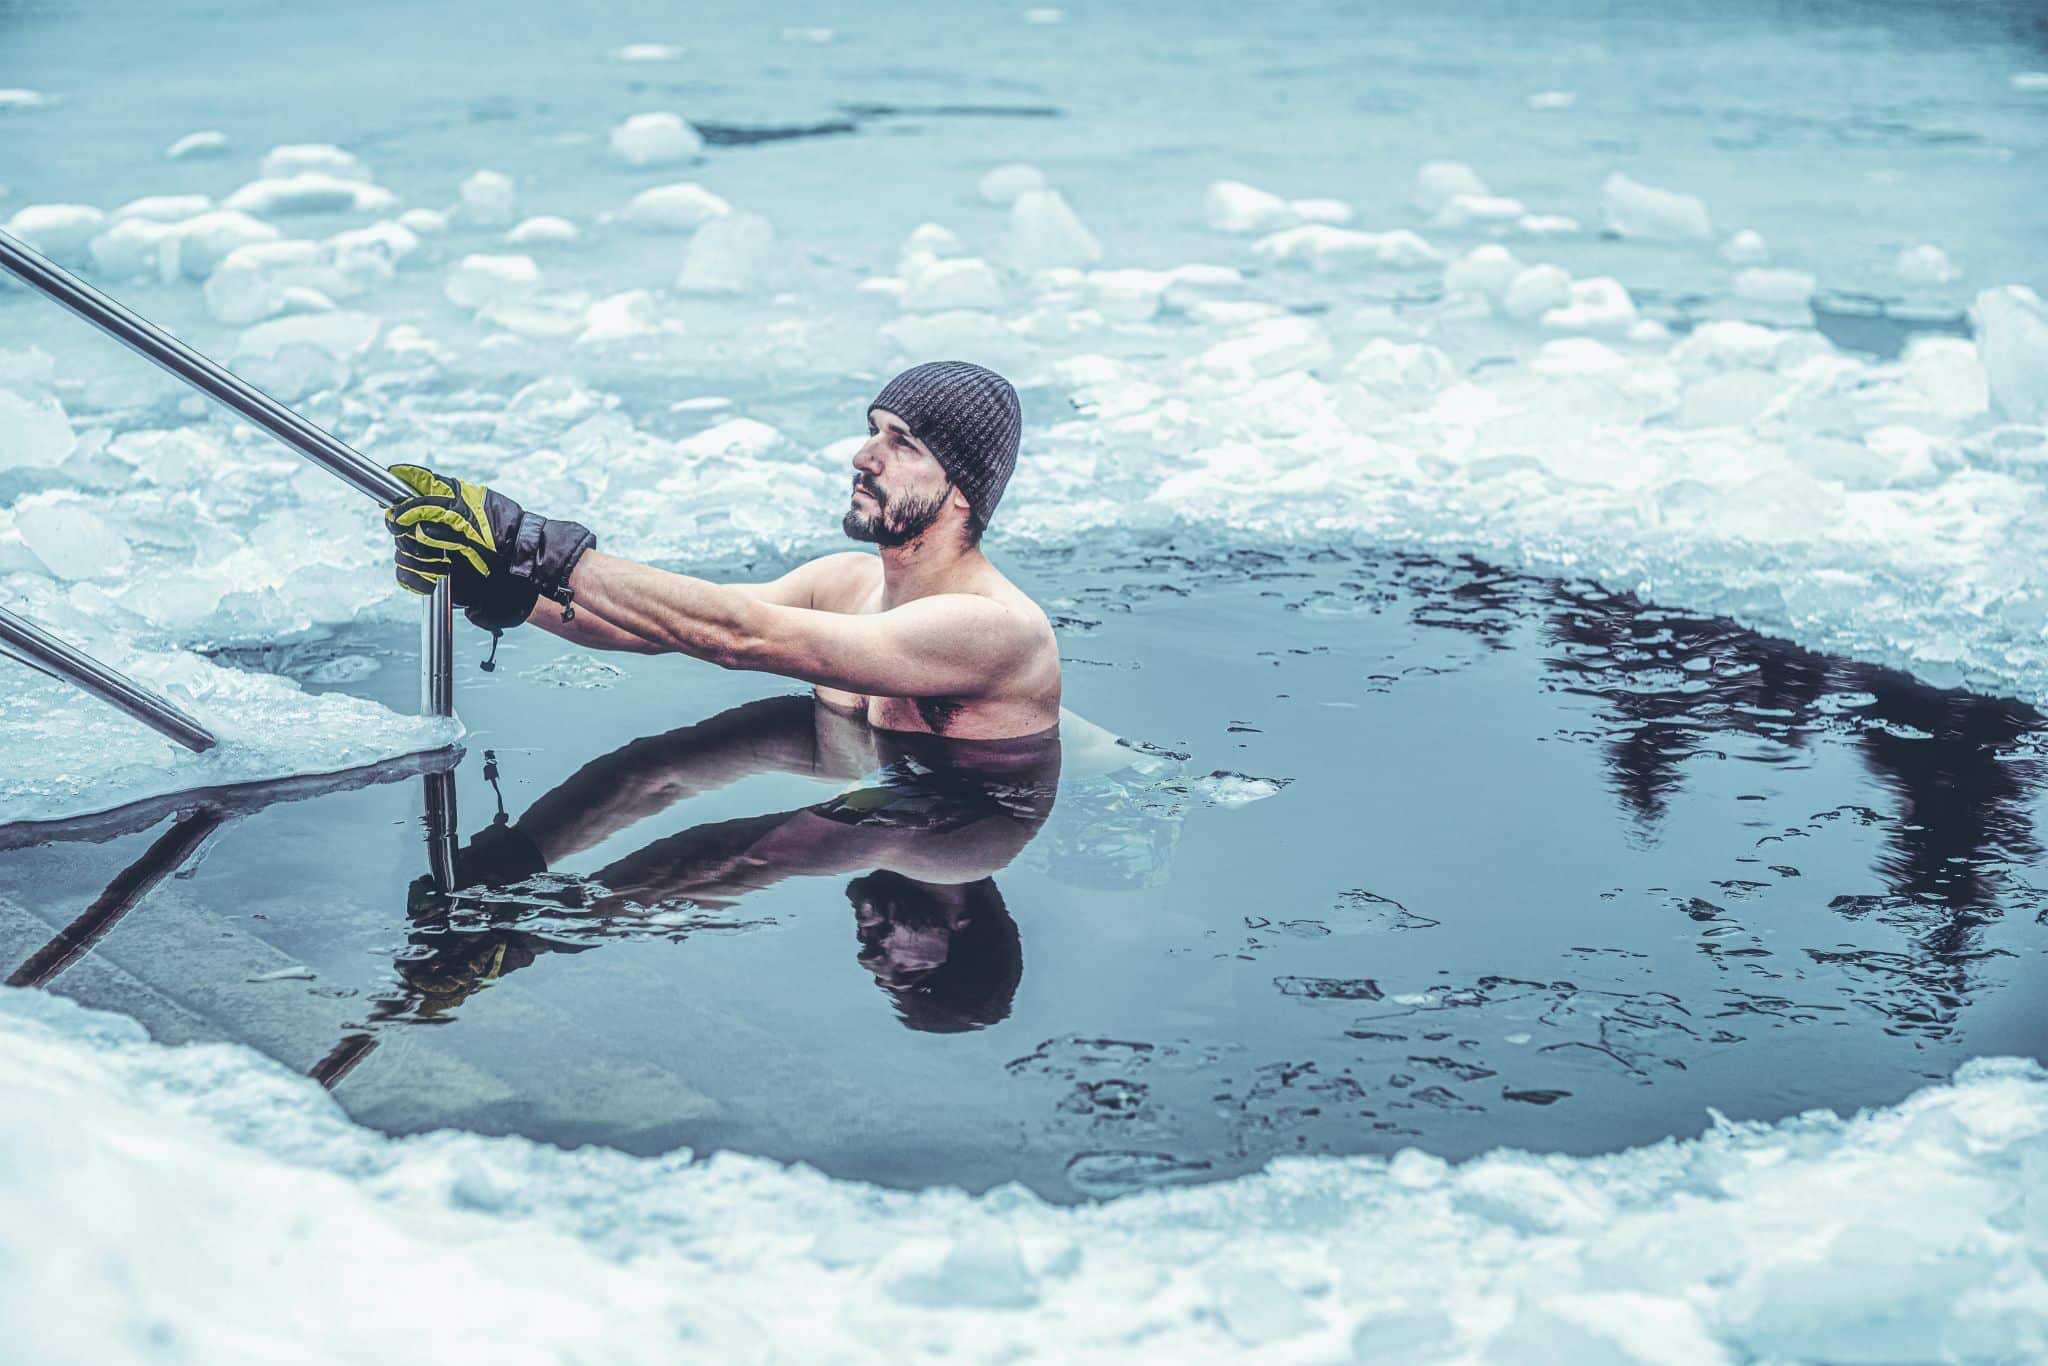 Ice Man' Wim Hof explains how to train your body for cold water